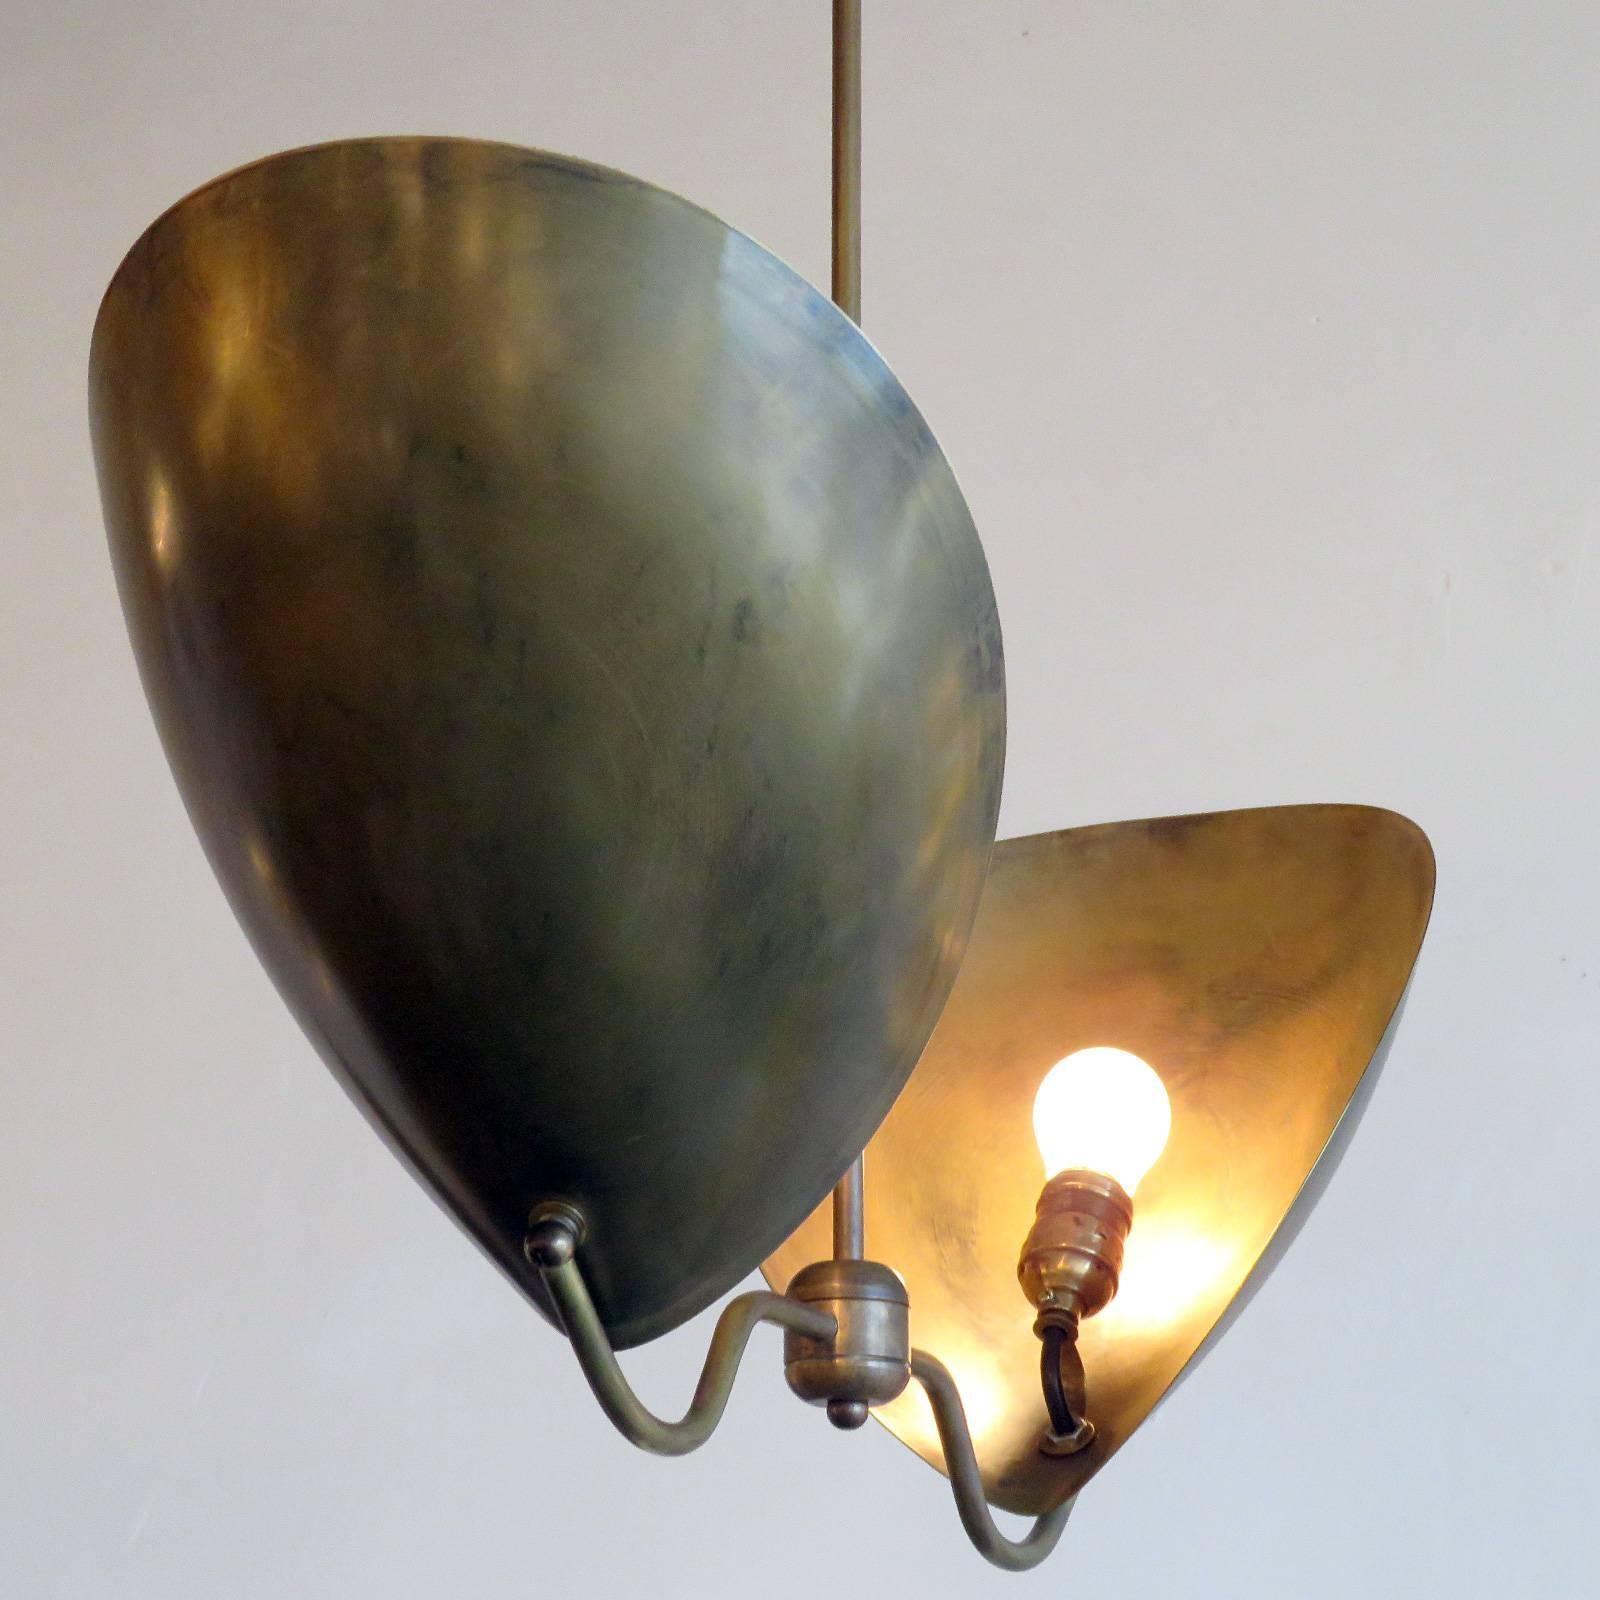 Brass Chiton-2 Chandelier by Gallery L7 For Sale